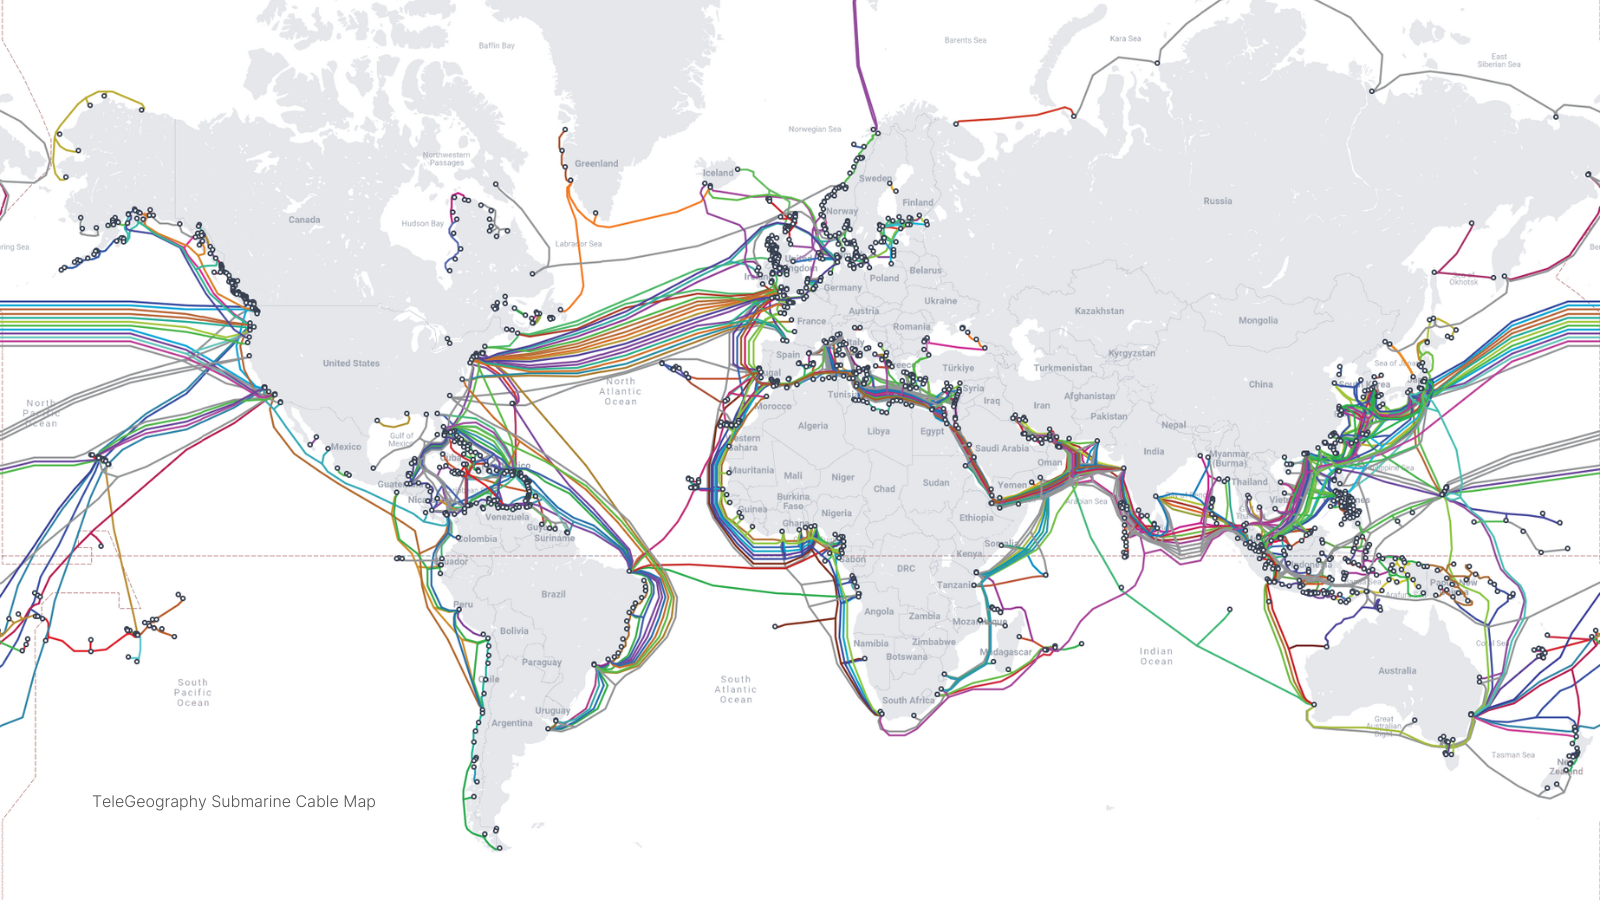 TeleGeography Submarine Cable Map